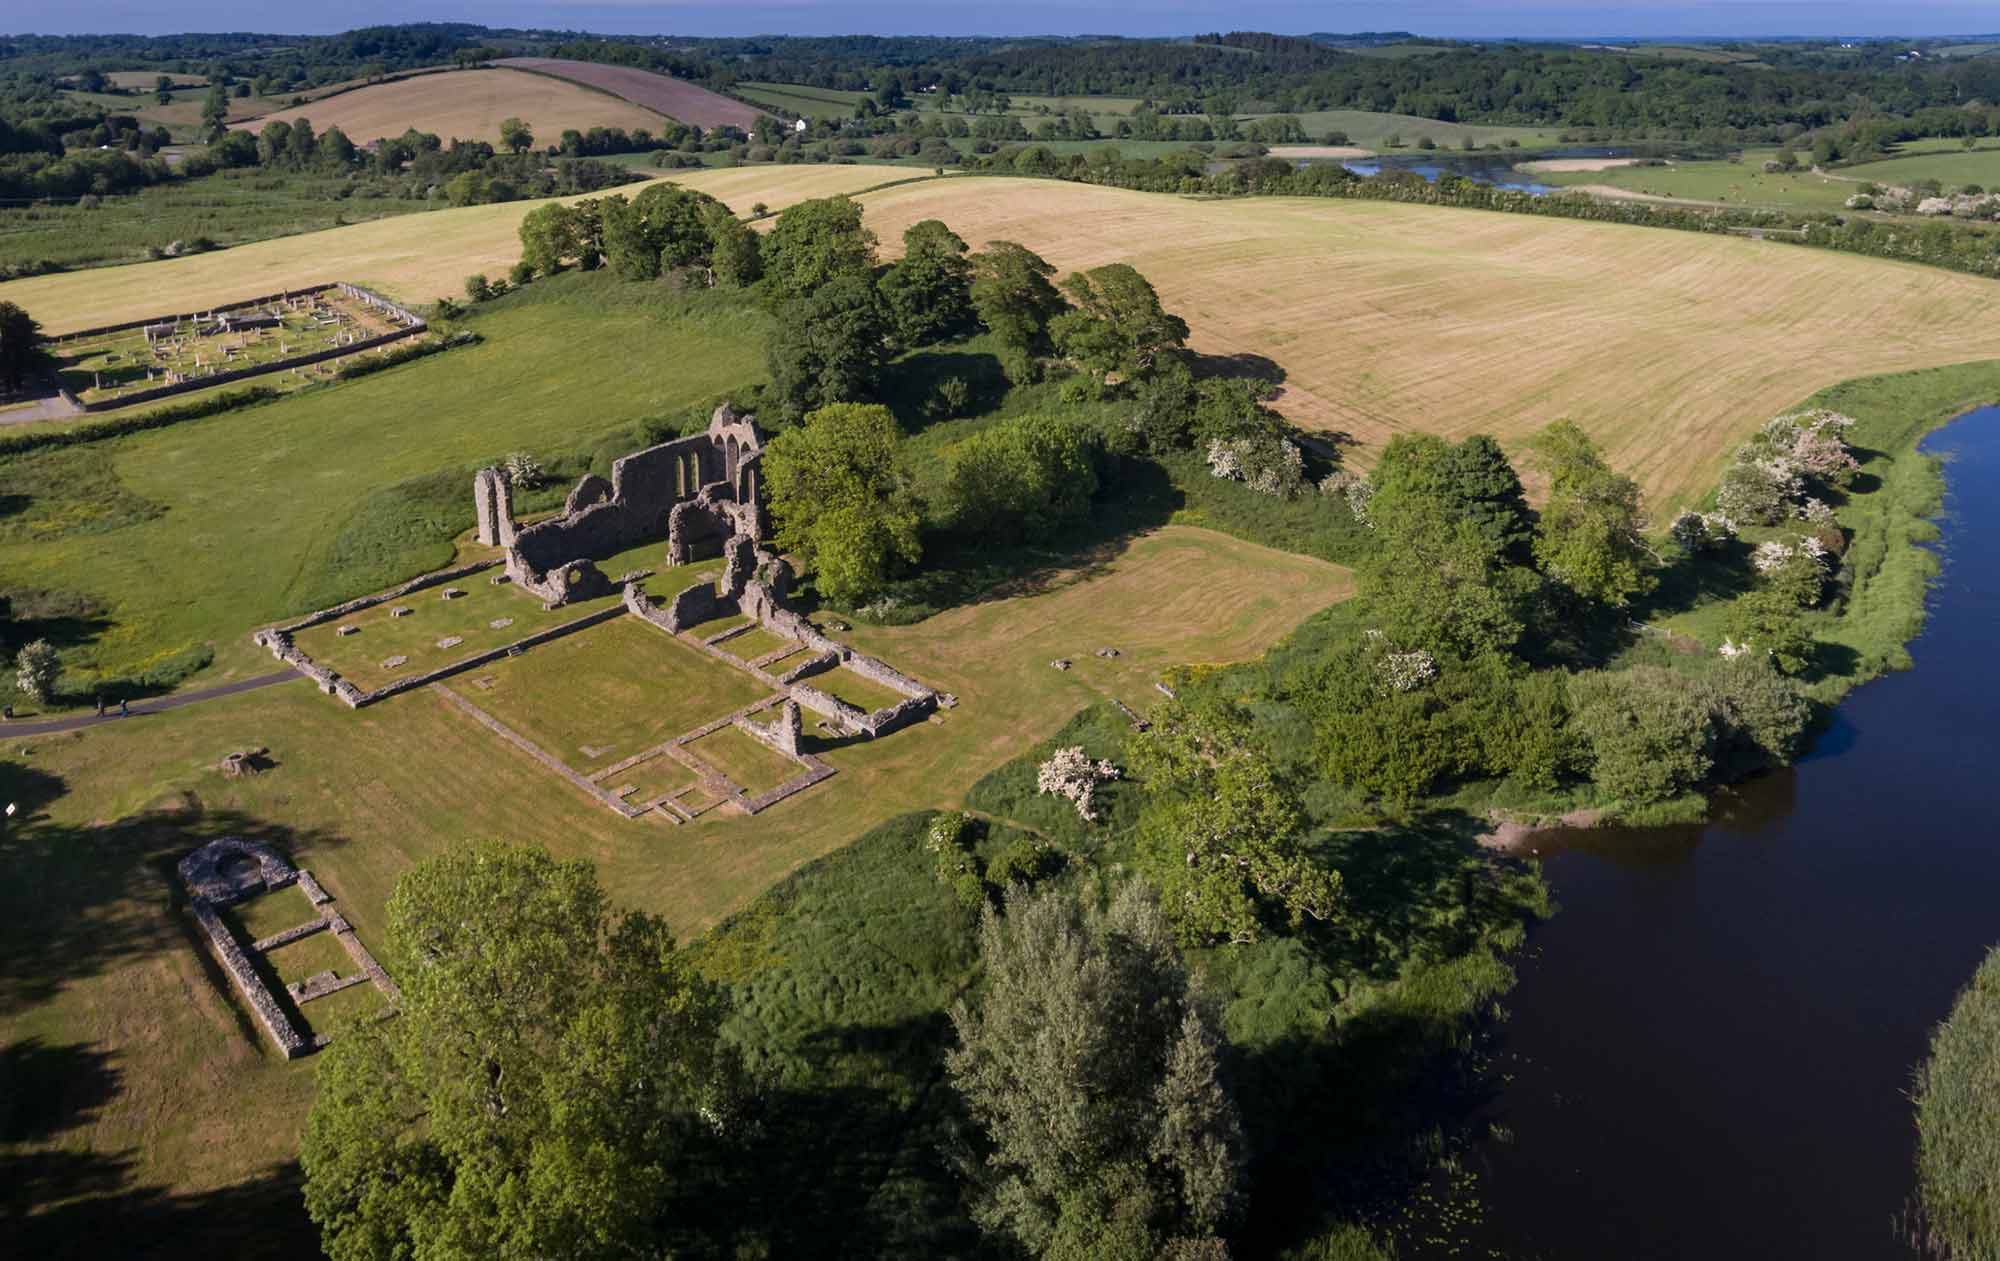 The Enigmatic Inch Abbey